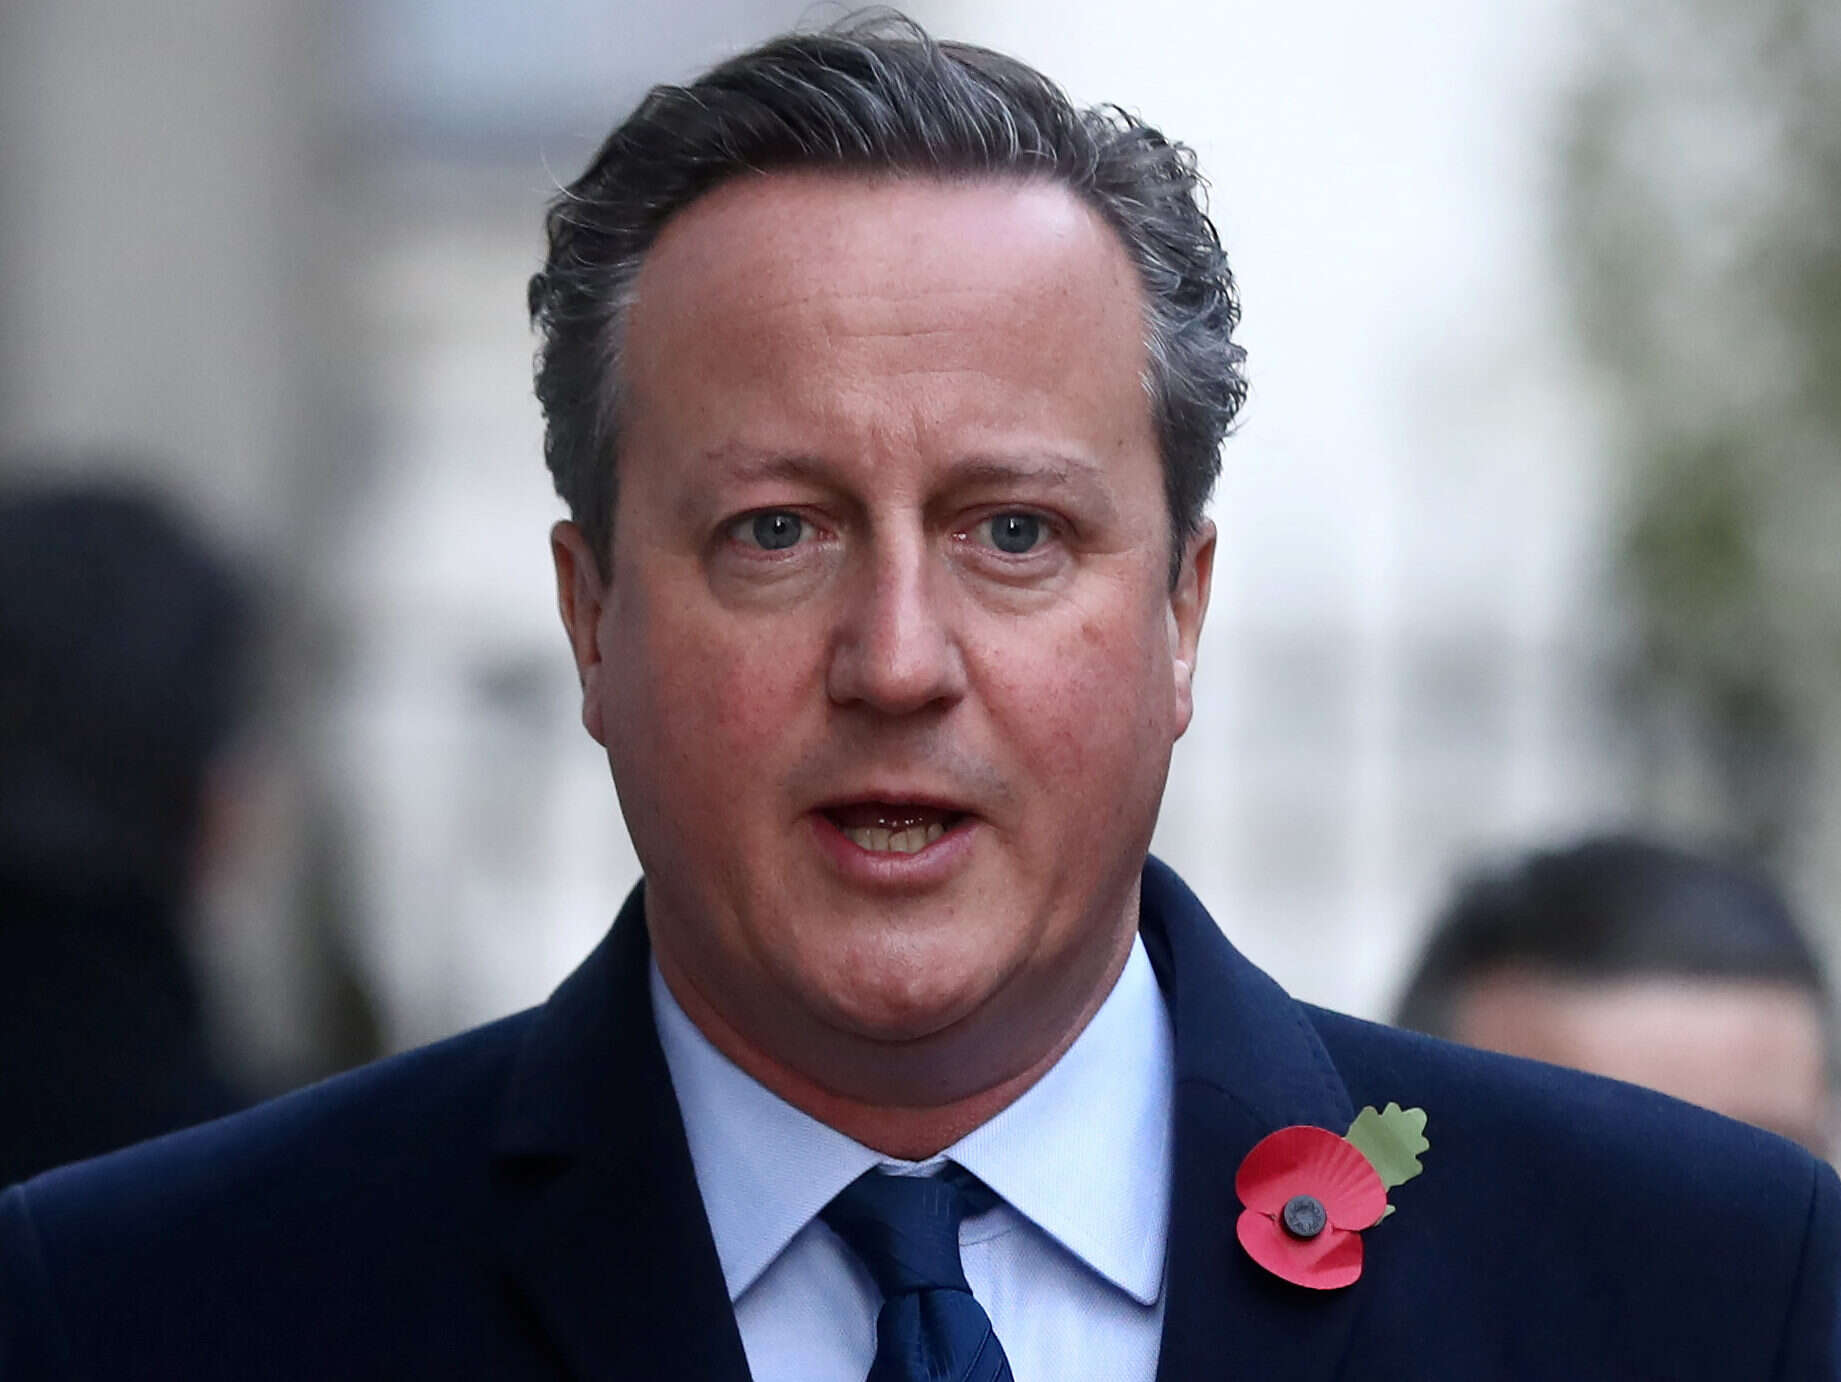 Guardian tightens Sunday editorial processes after David Cameron 'privileged pain' leader